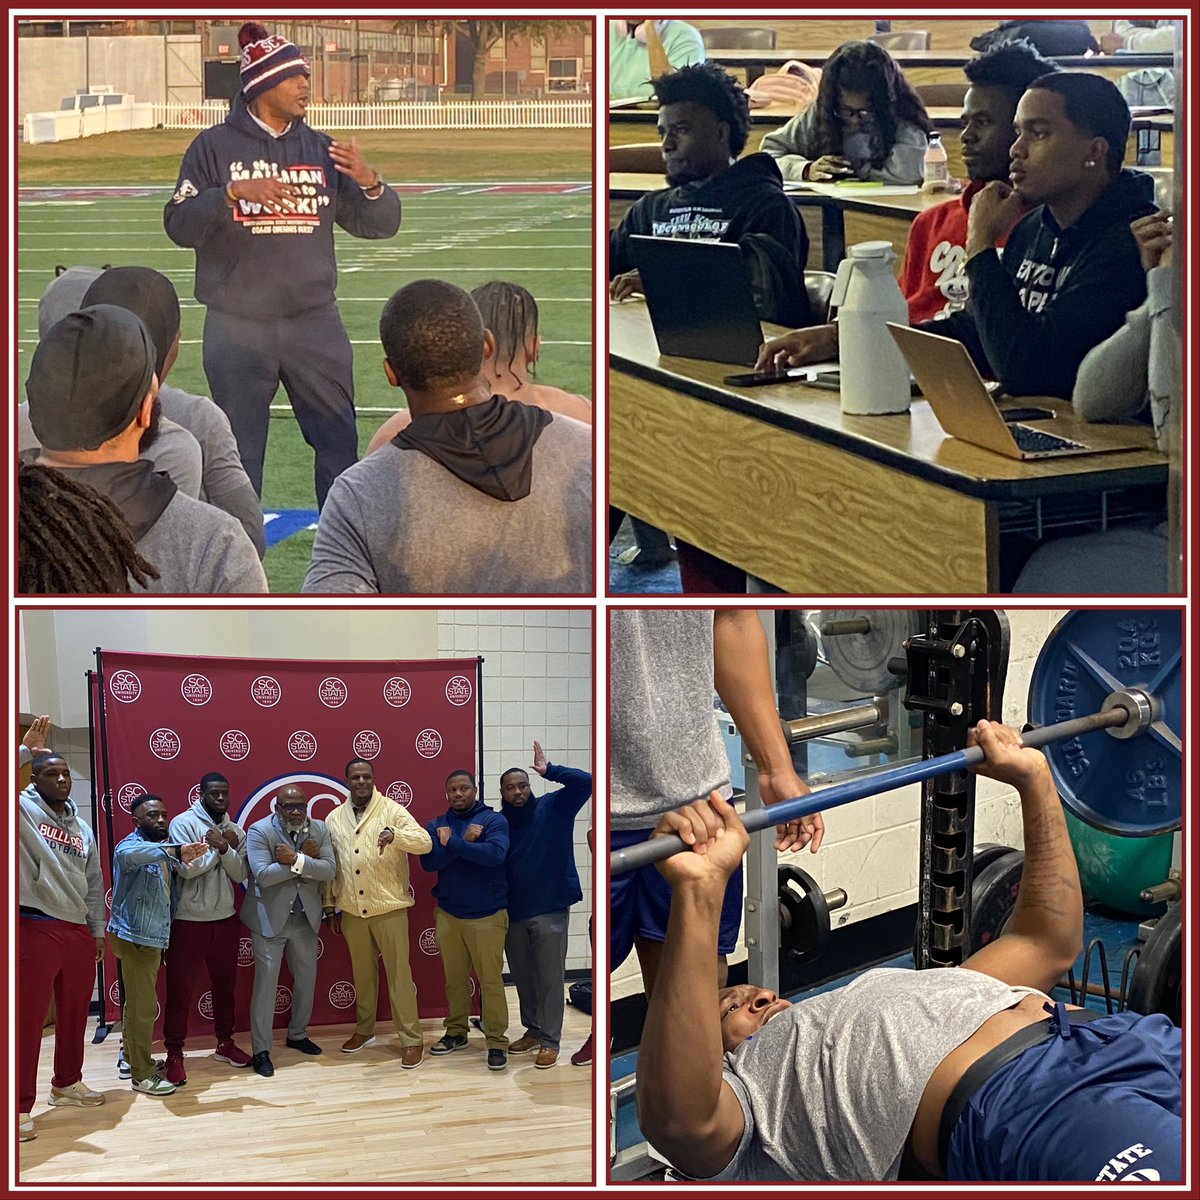 Go Dogs! Great week! ✅We Educate Wednesdays ✅Players in the 1st 3 Rows of class ✅100% Study Hall Attendance ✅Weights ✅Team Run ✅Commitments Dig Deep with Bulldog Tenacity! #fearthebite #bitedown #PayTheFEE #CWCW #DOG